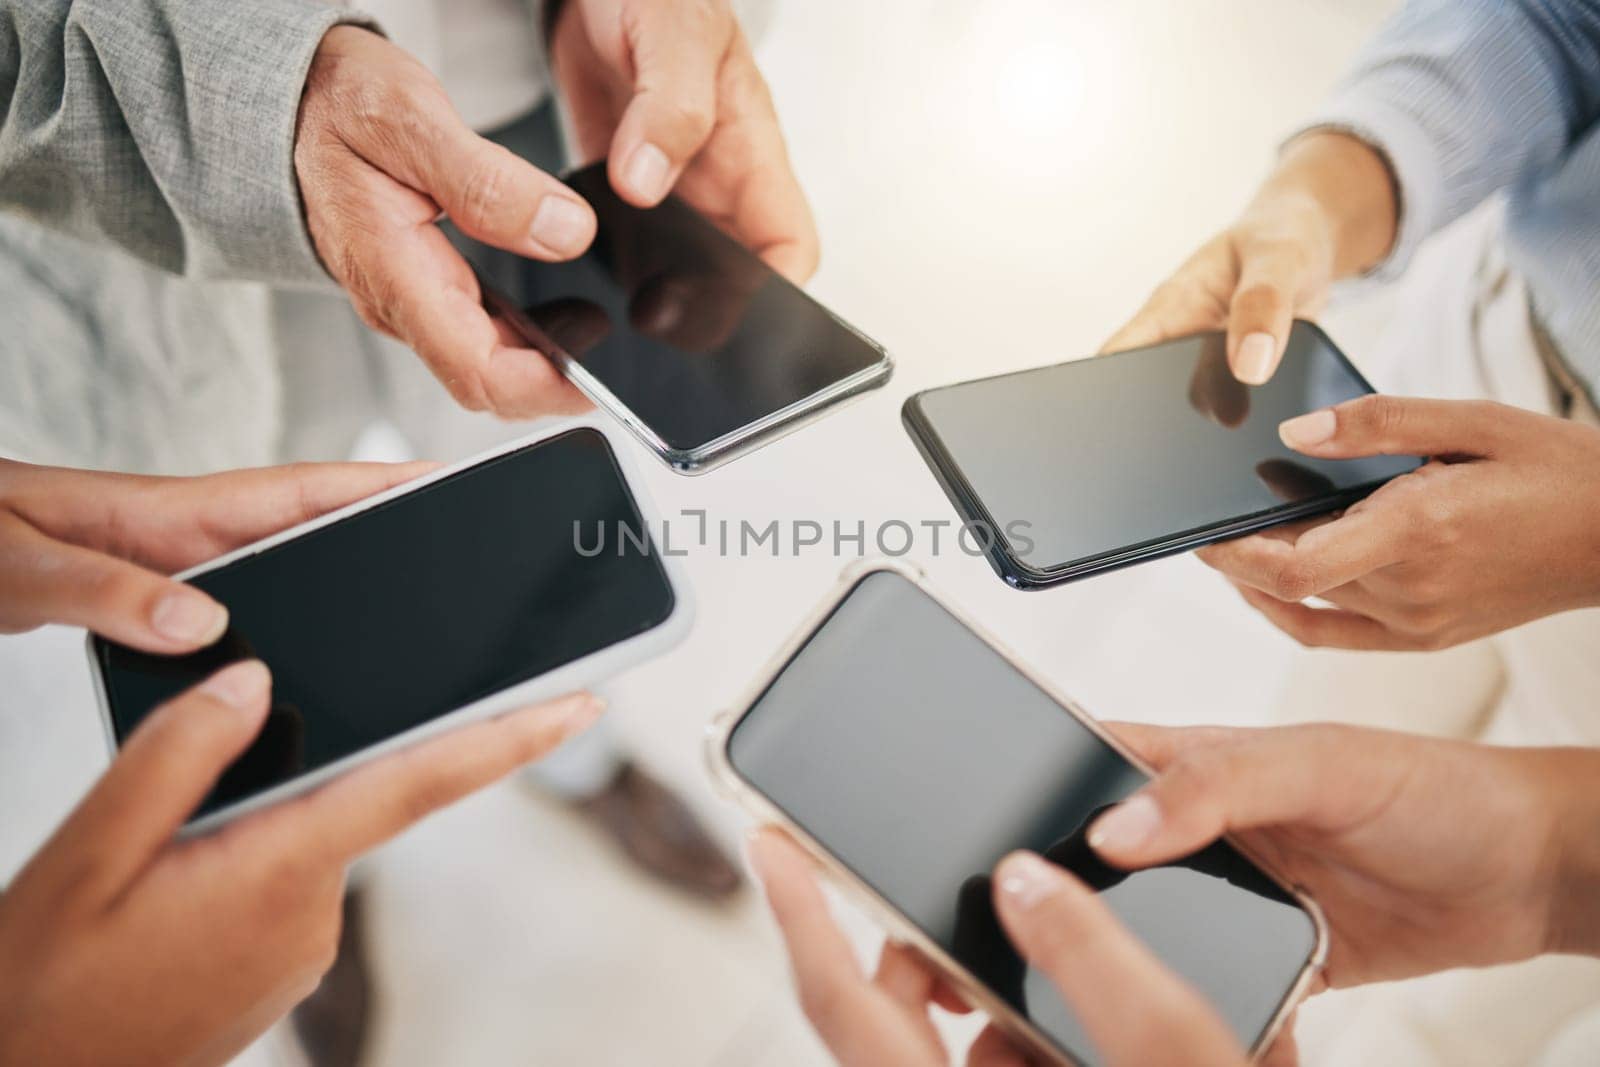 Smartphone, business people and hands with mockup, corporate communication marketing and technology with collaboration. Mobile phone, internet and networking with teamwork, employee group and connect by YuriArcurs